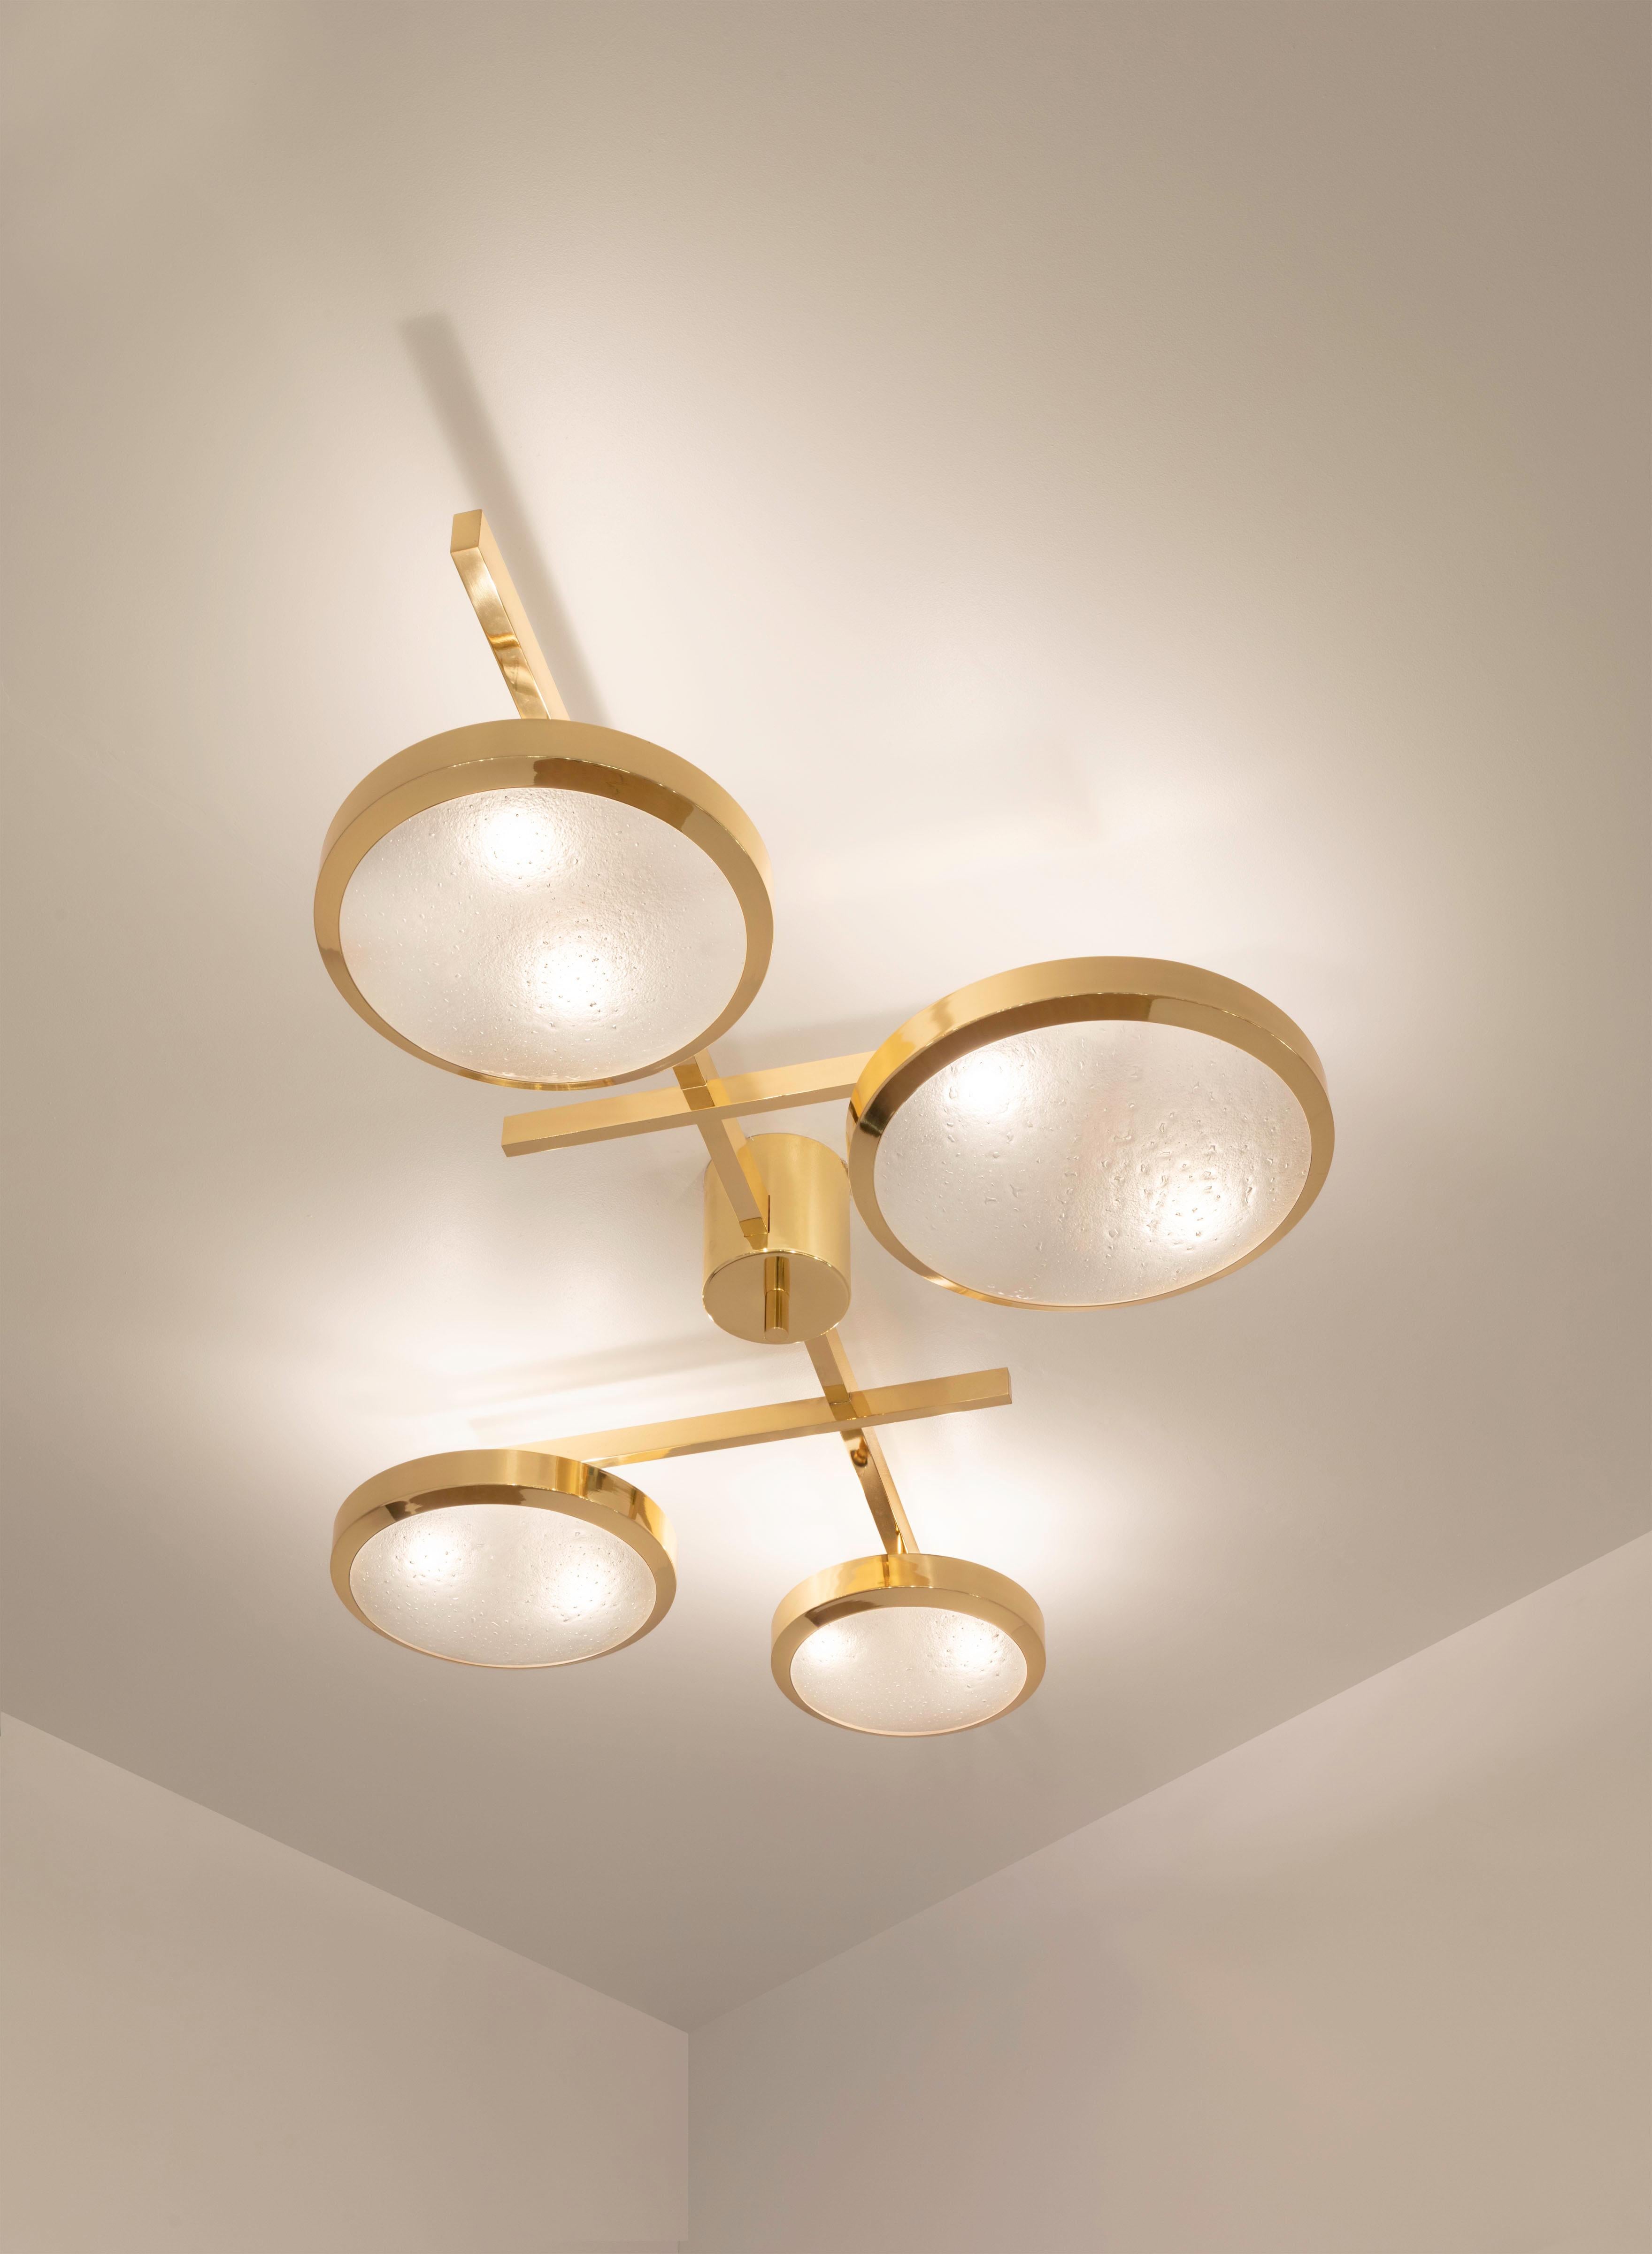 Tetrix Ceiling Light by Gaspare Asaro - Satin Nickel Finish For Sale 2